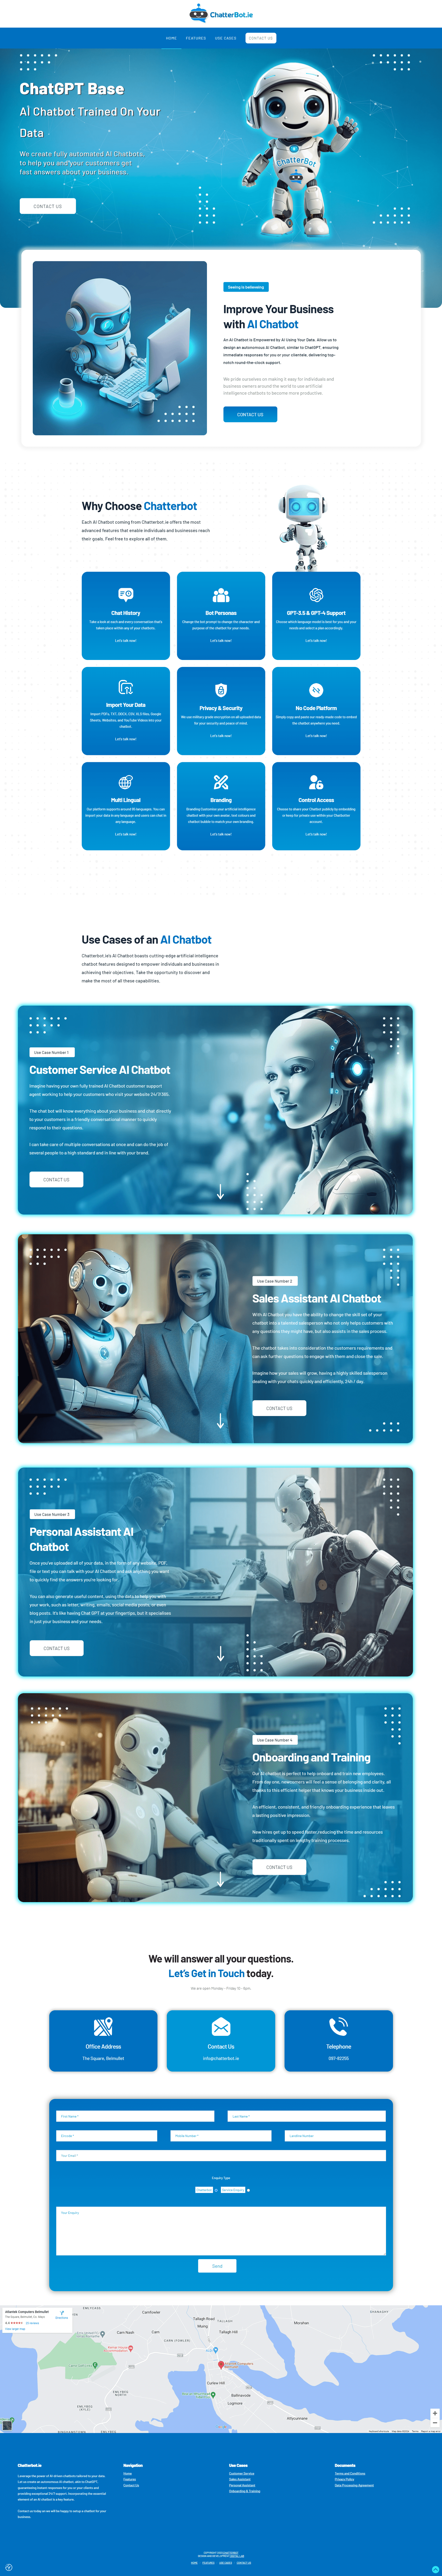 Web Design Maynooth for Chatterbot